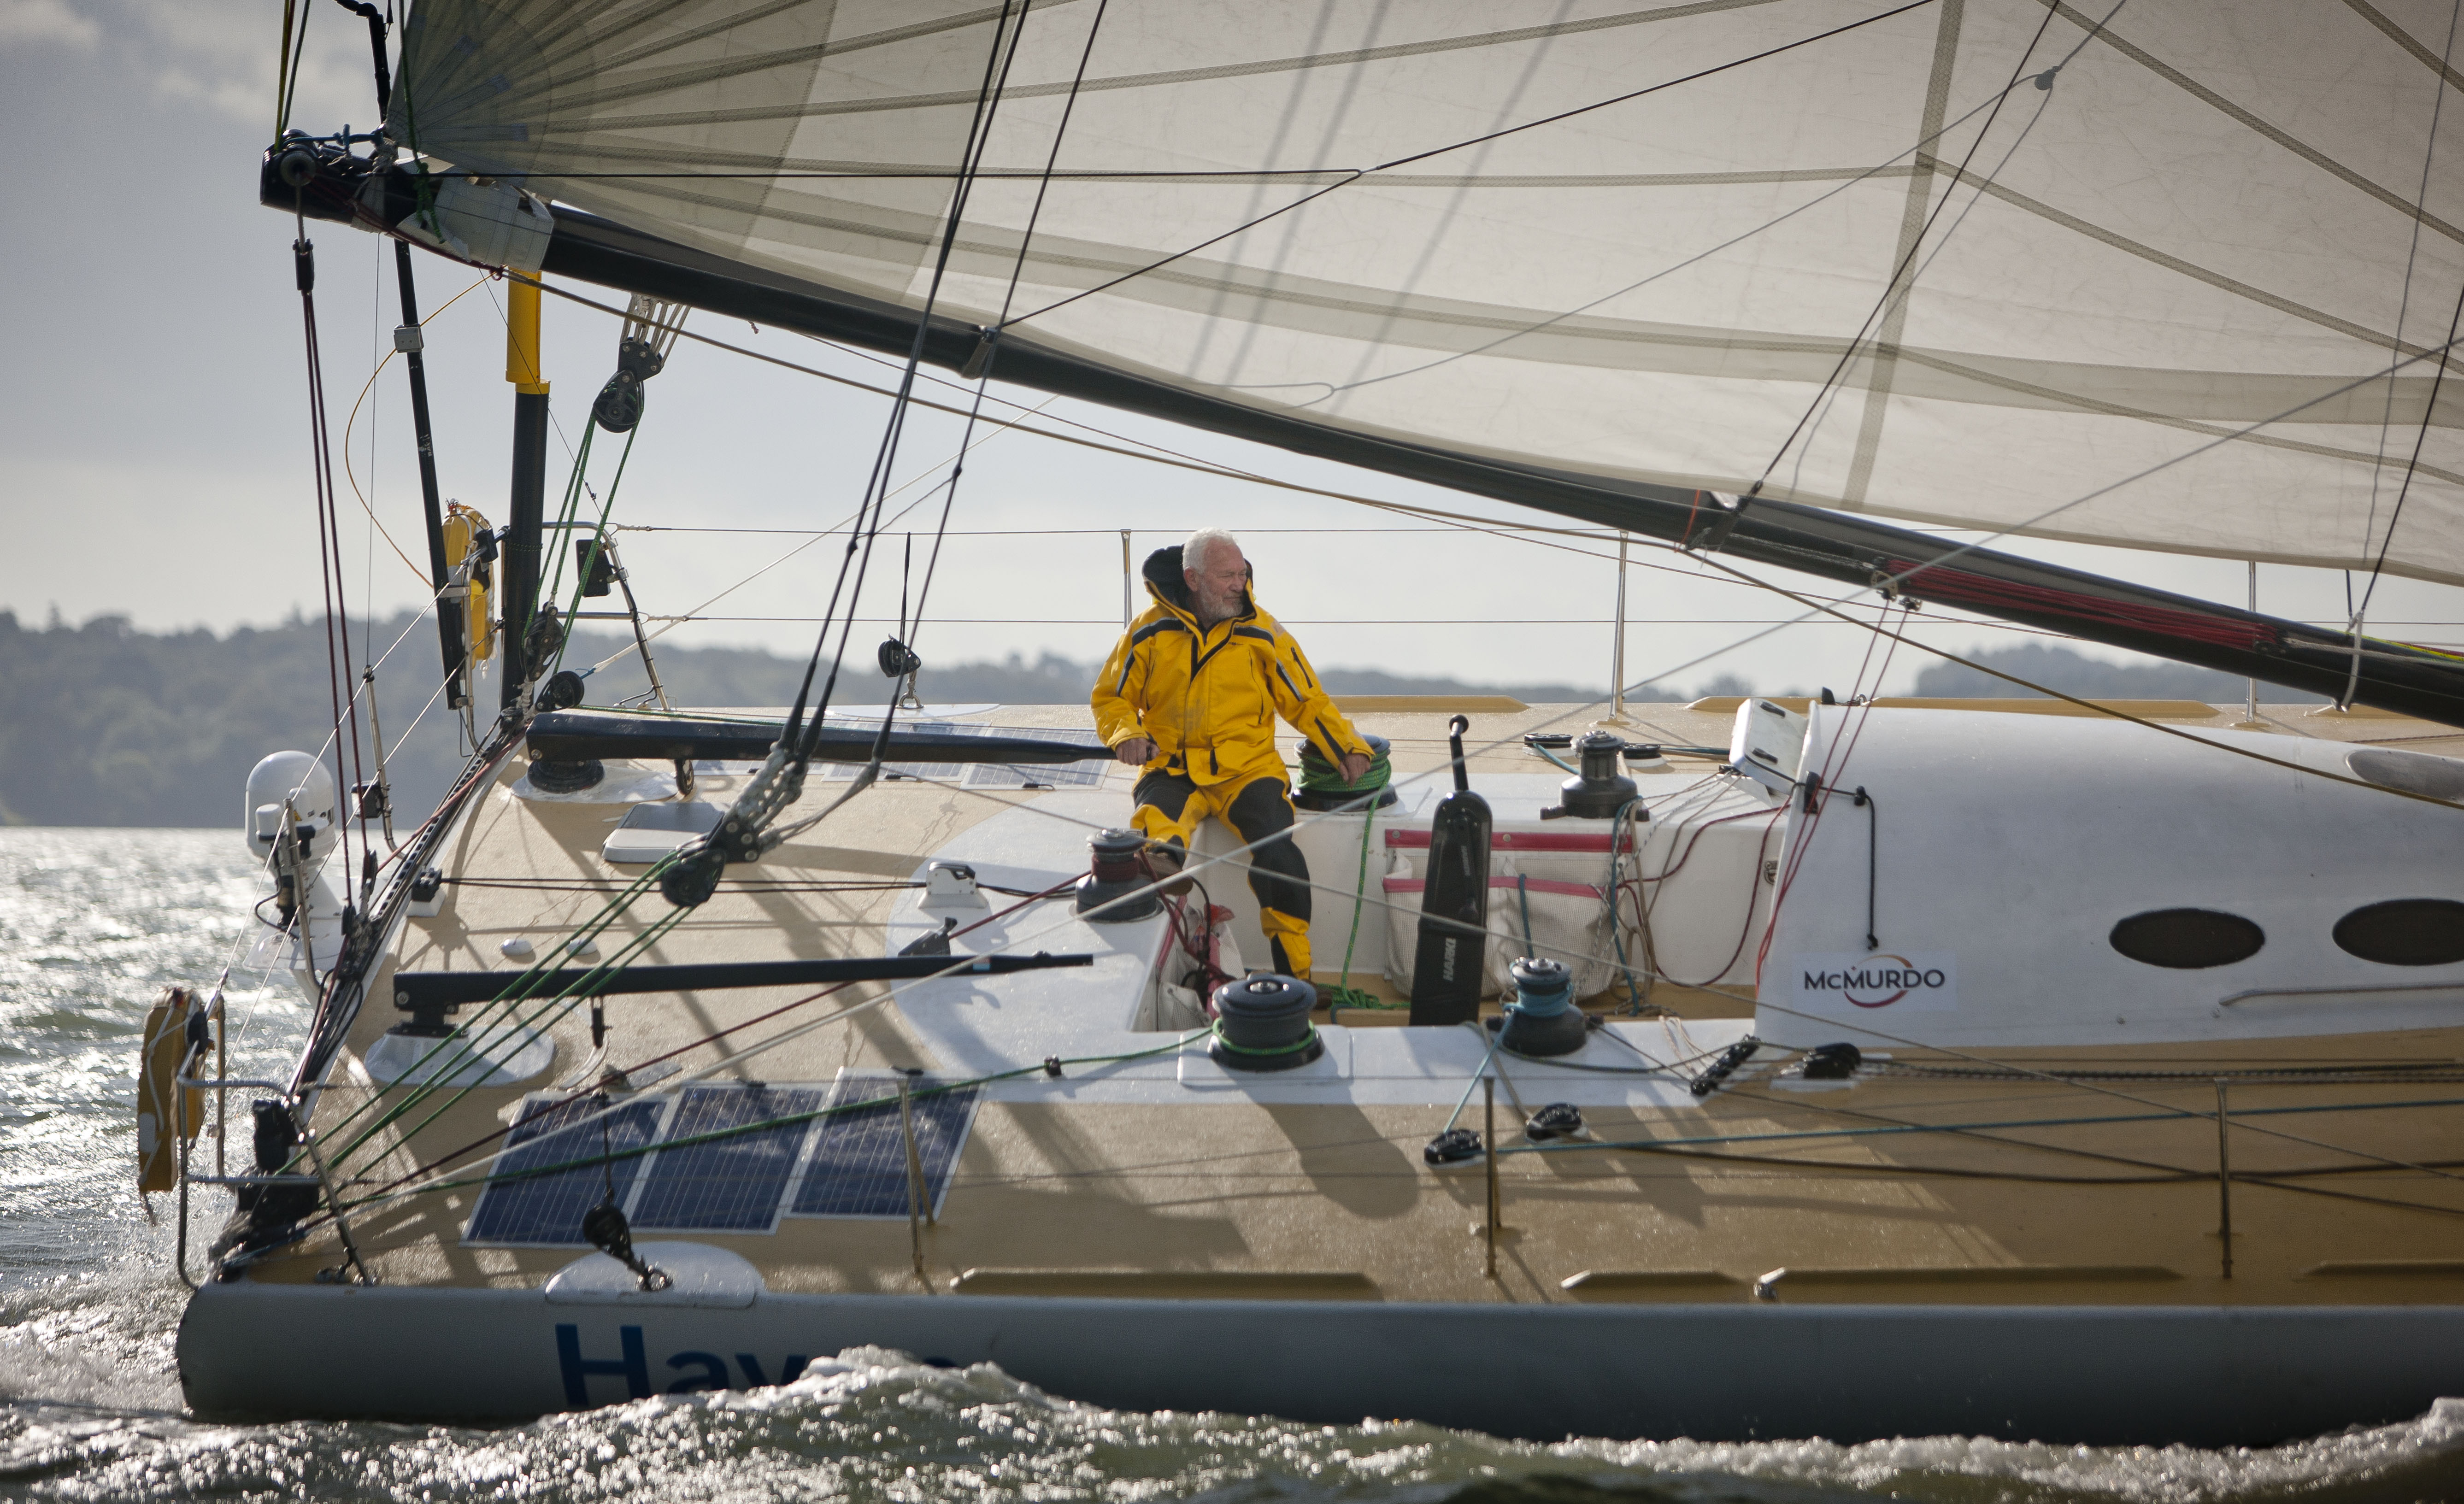 Sir Robin Knox-Johnston moves up two places in Rhum class